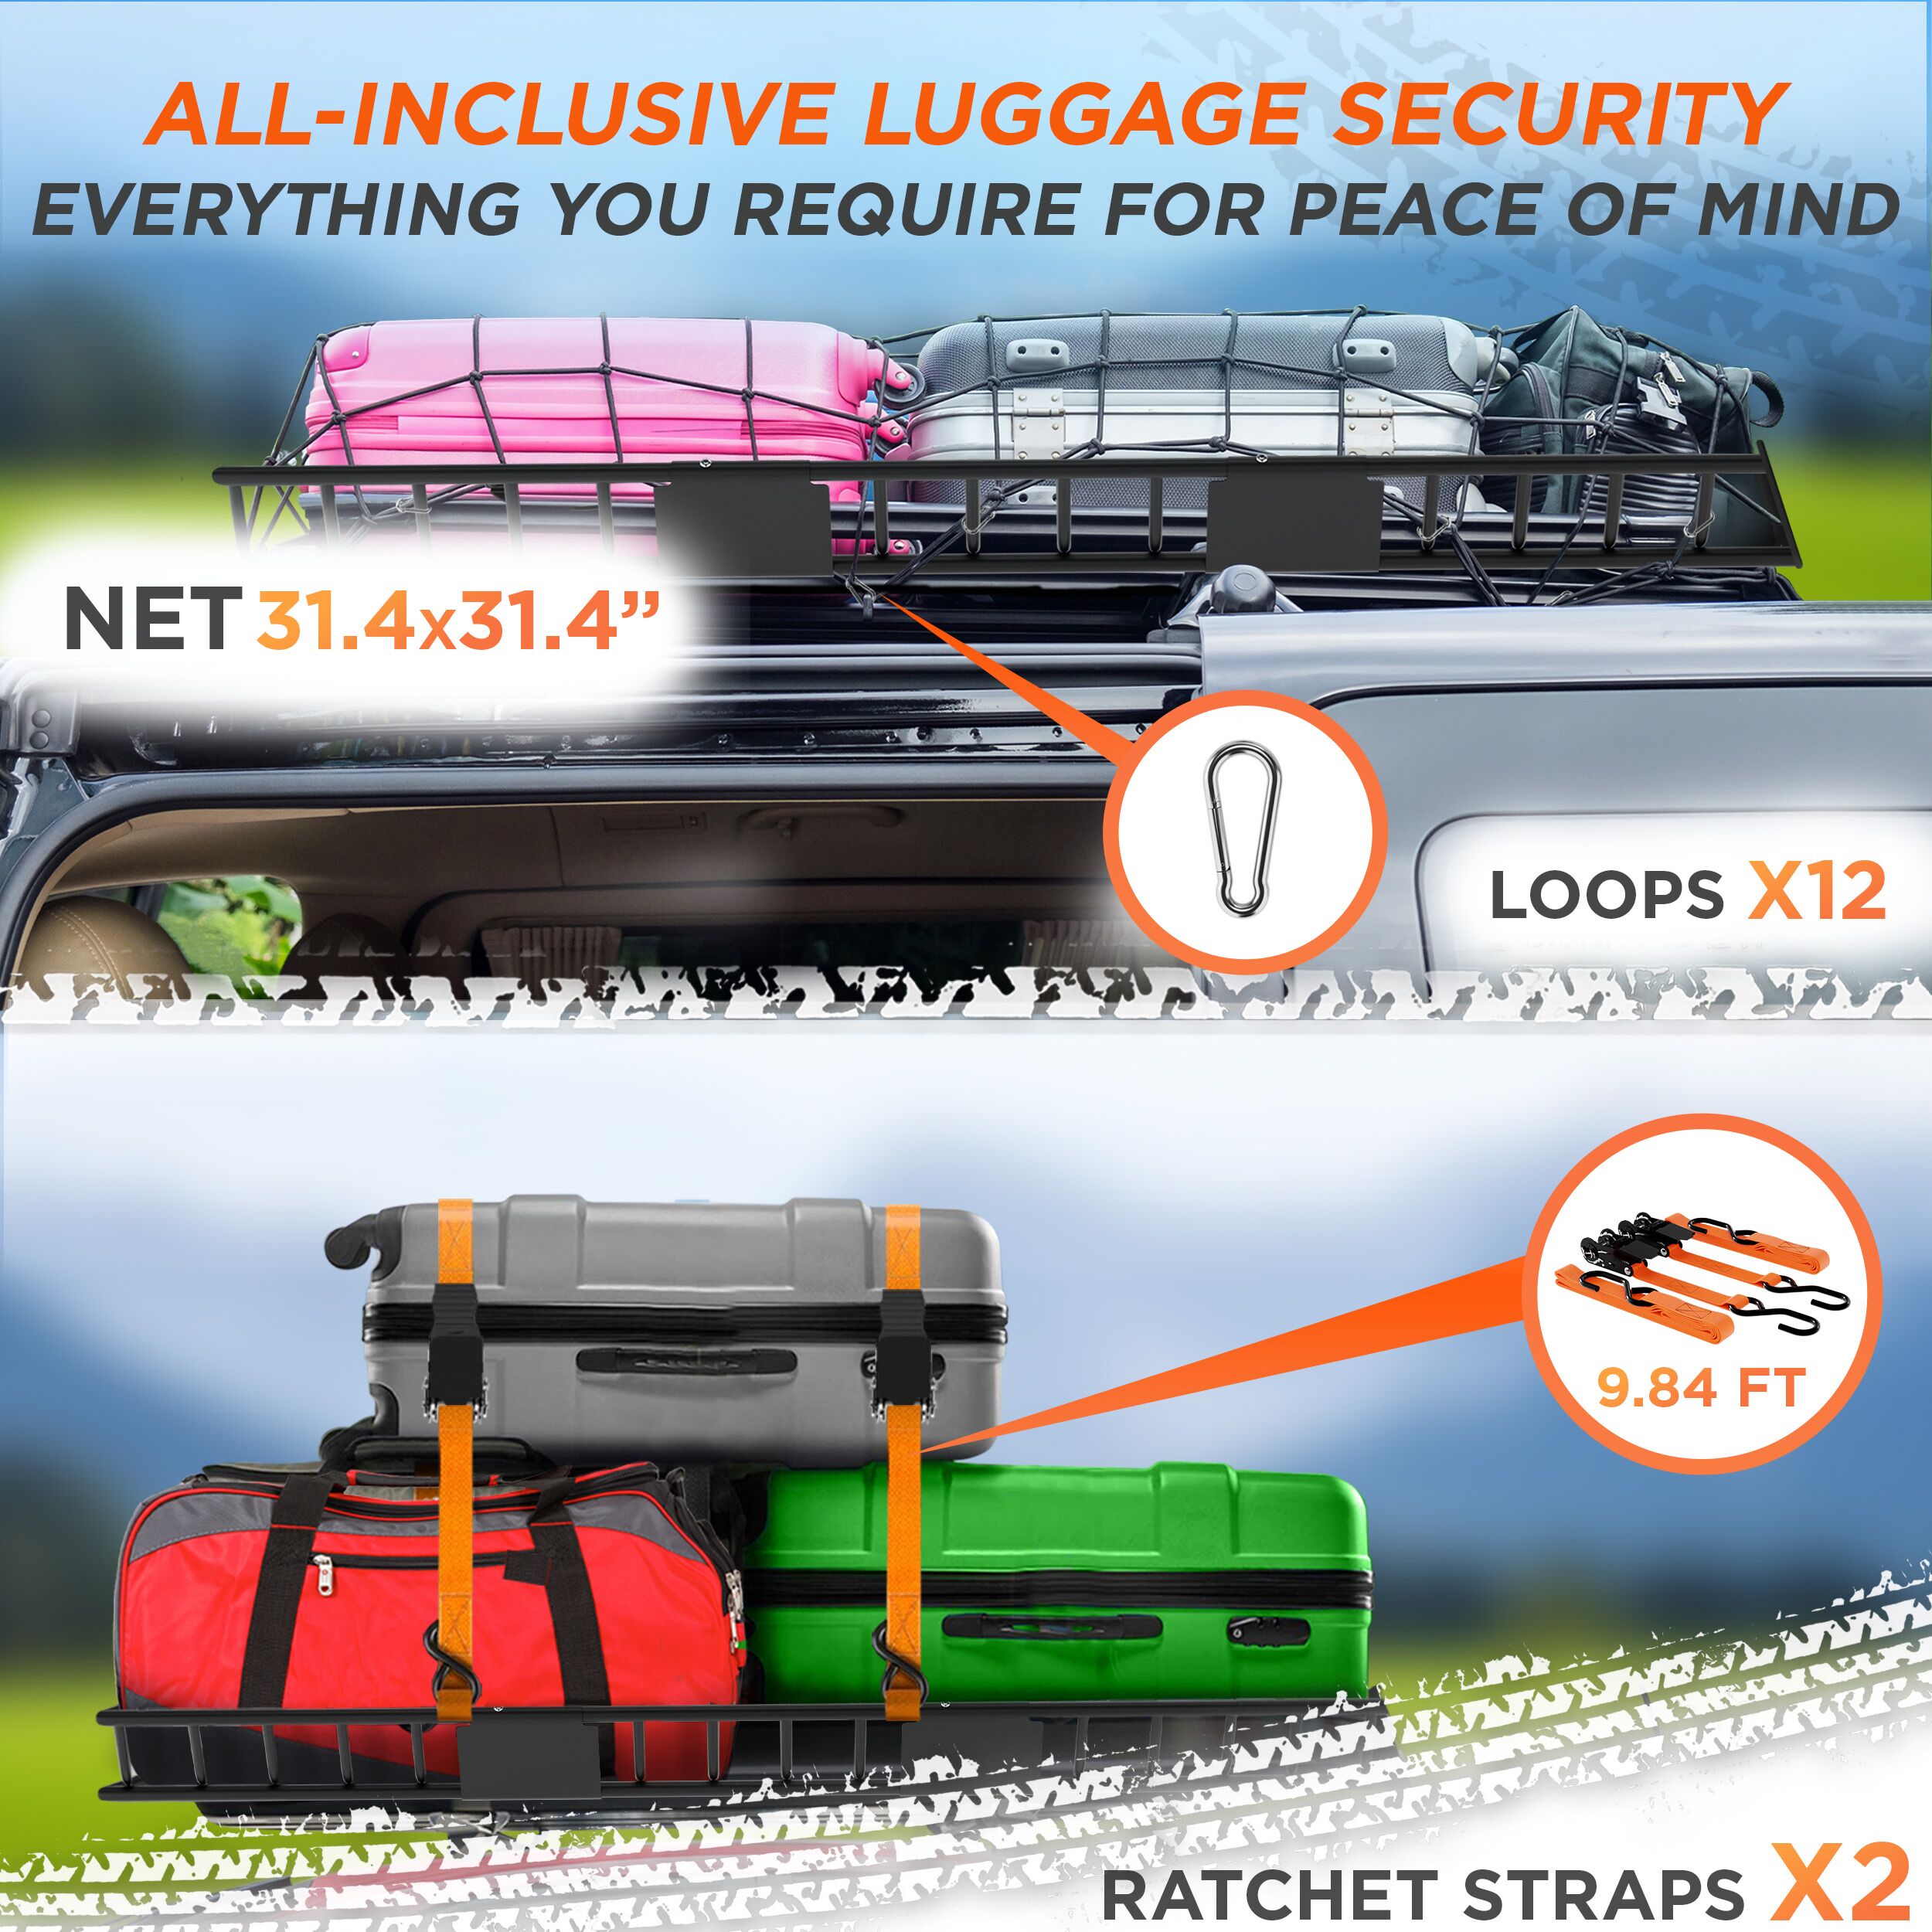 Car Roof Rack Basket - RoofPax: Travel More - Worry Less!